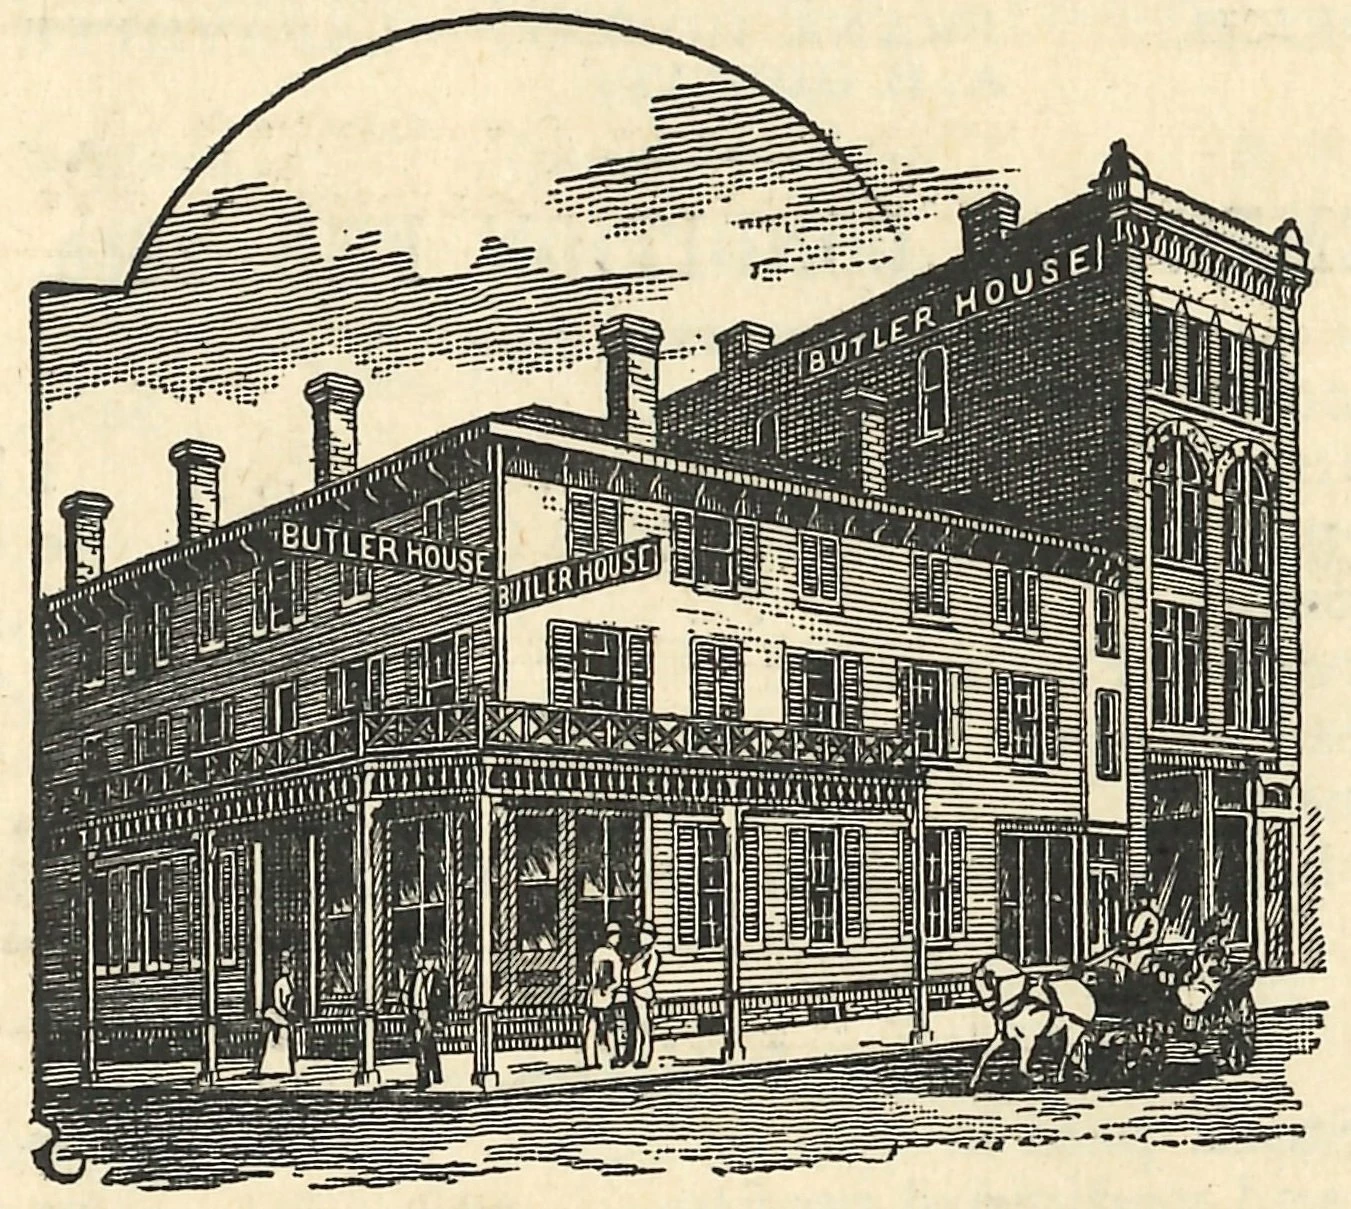 a drawing of a three-story frame building. The second story has a balcony that overhangs the sidewalk. People are walking, and a horse and carriage are in the road.